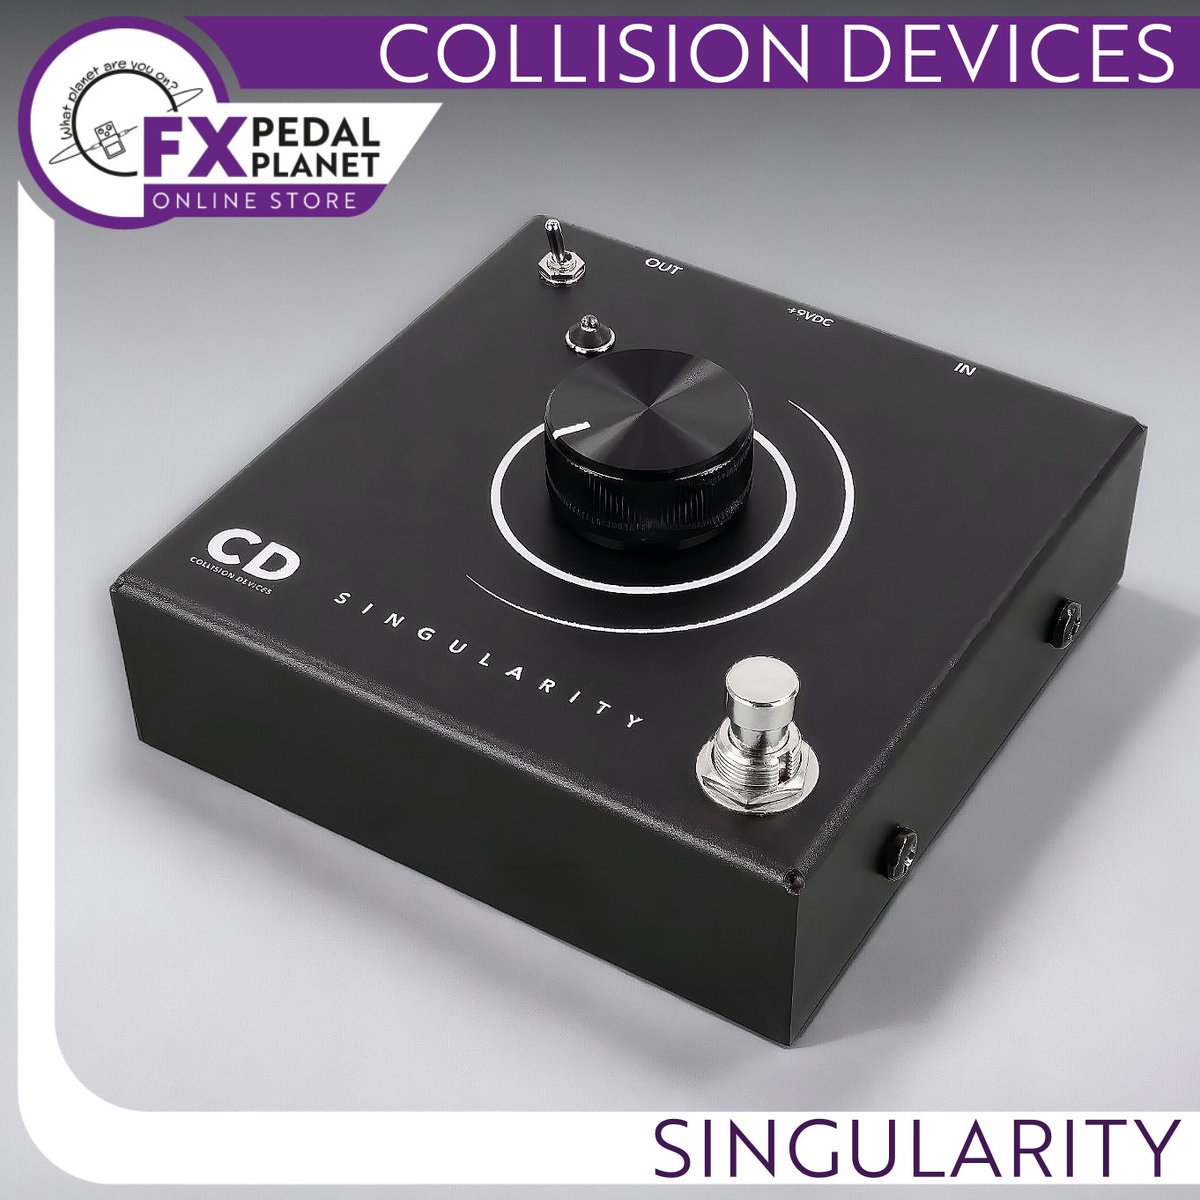 🌟🌟 NEW ARRIVAL 🌟🌟 The Collision Devices Singularity One Knob Fuzz pushes your instrument's signal to its limits, capturing black hole intensity. Ideal for guitar, bass, and synth, it has a single fuzz volume knob and a three-position low pass filter switch.